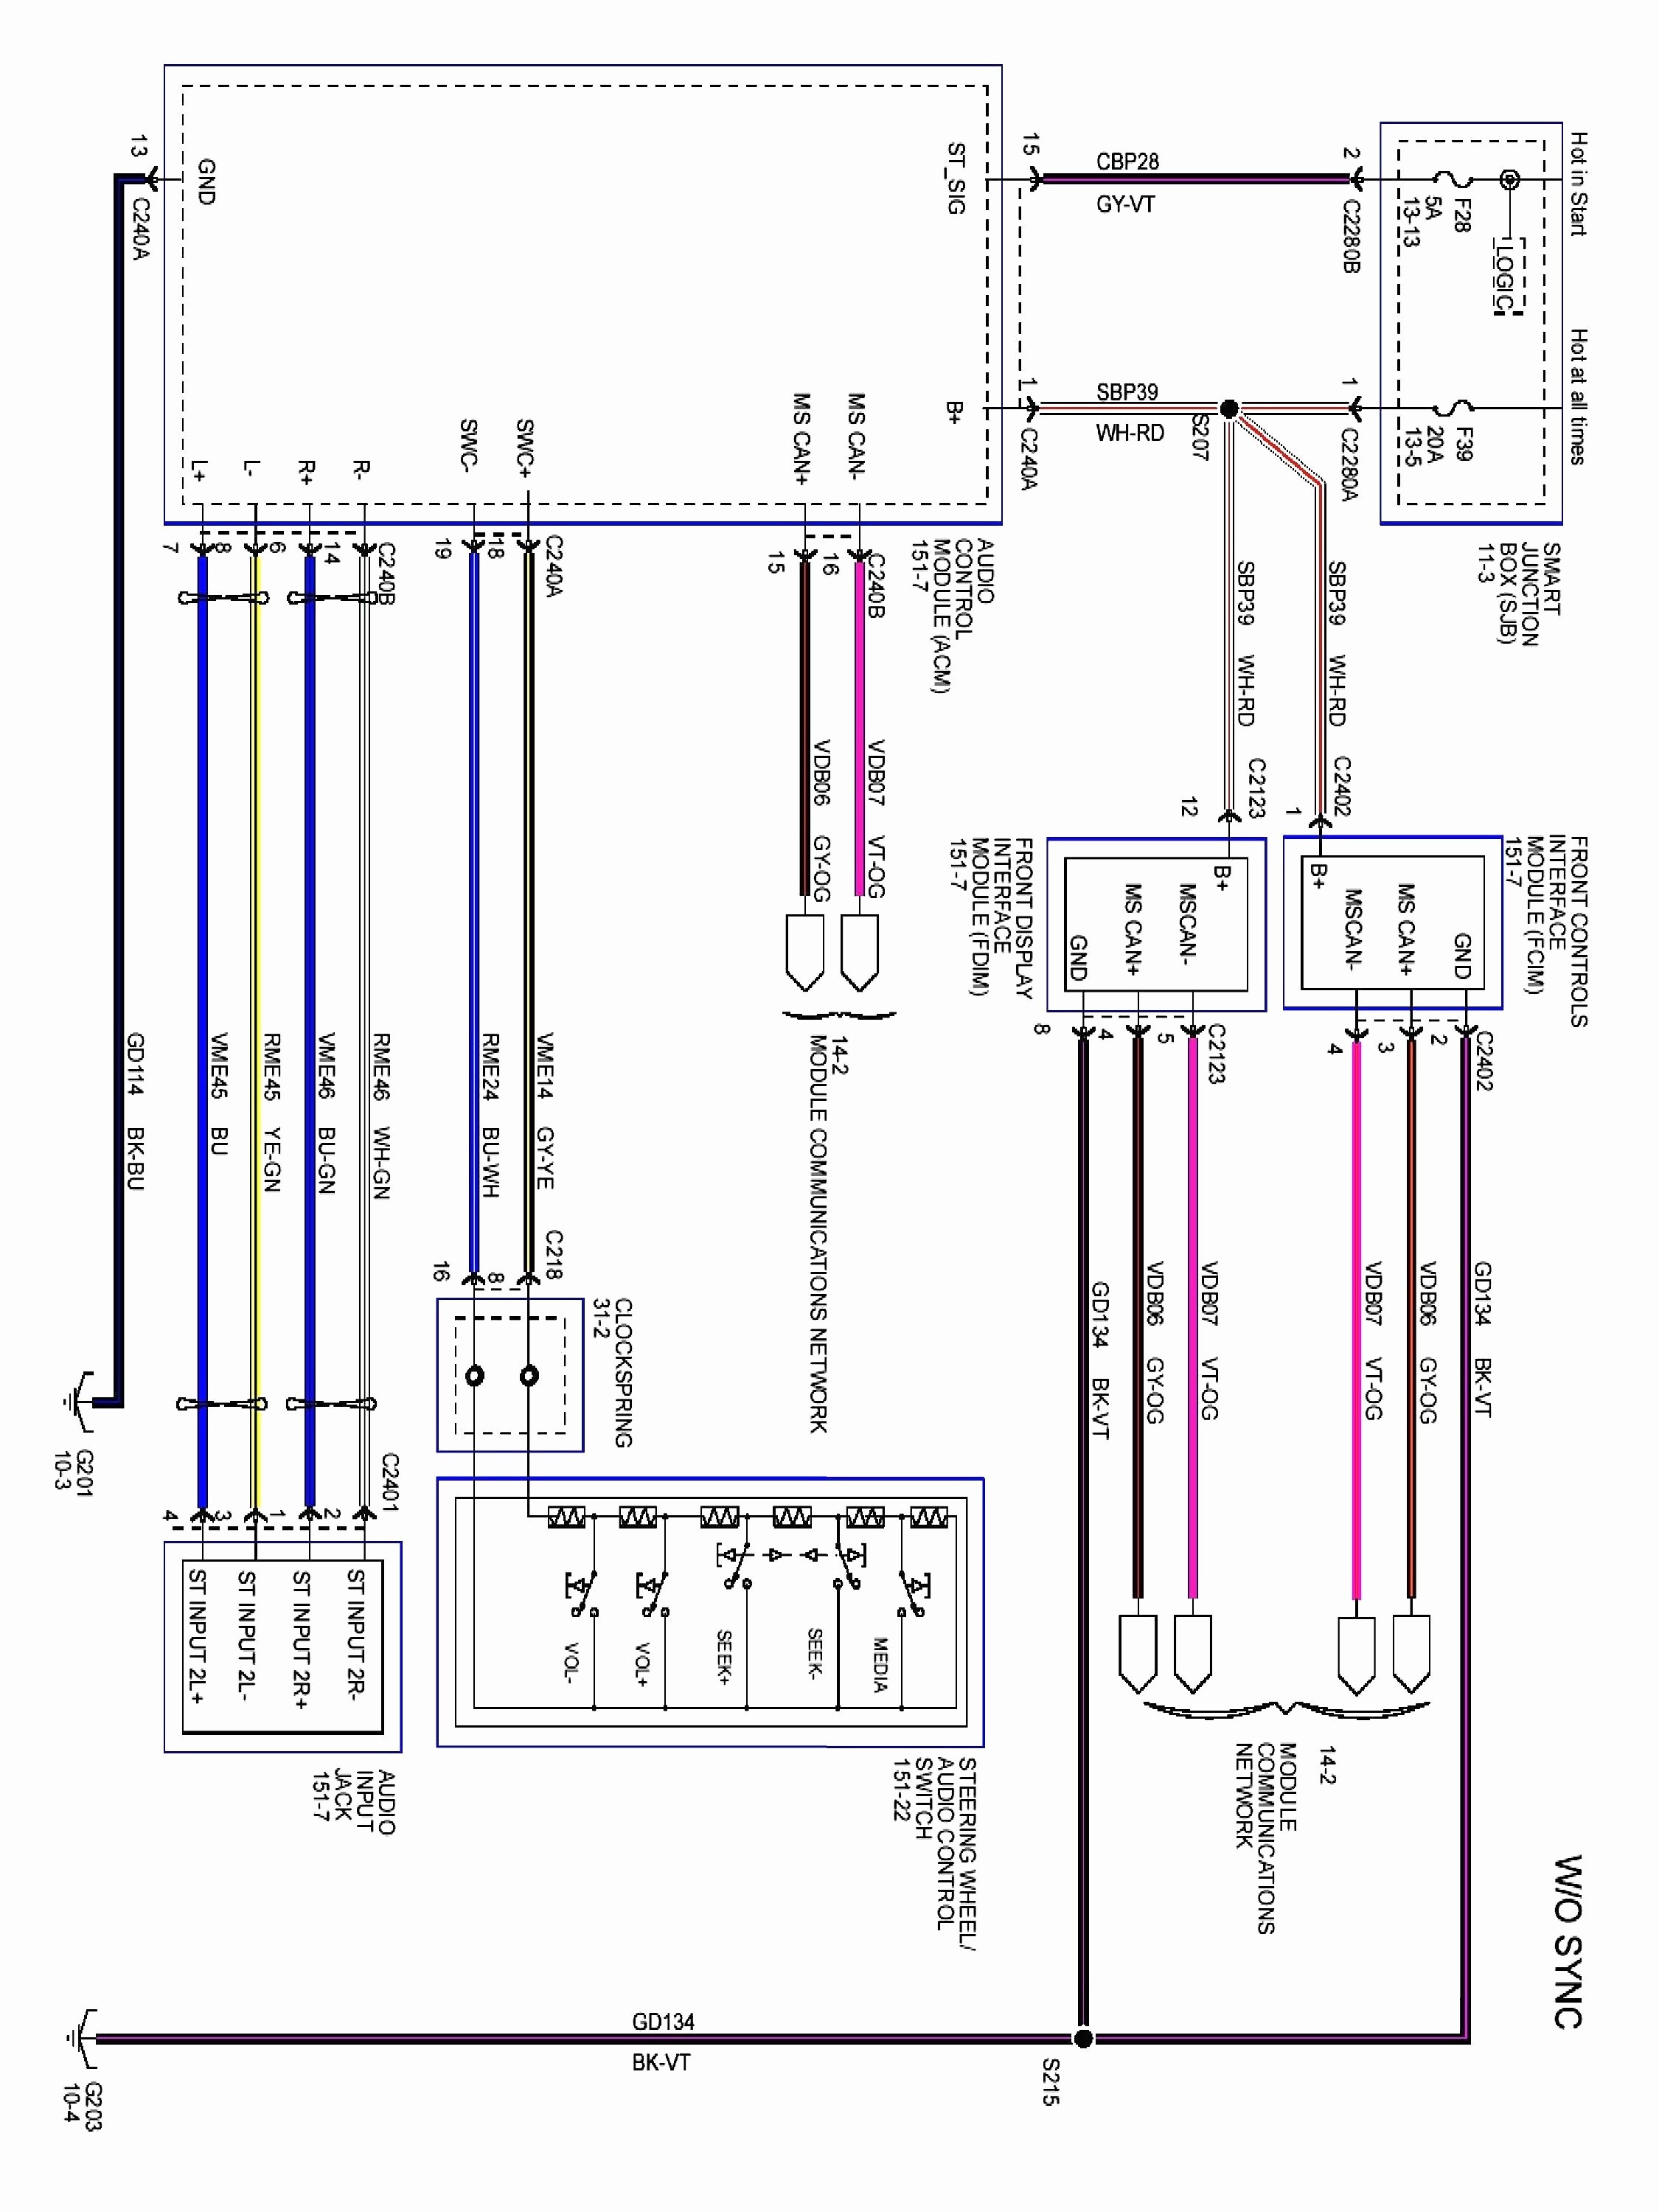 Wiring Diagram for Amplifier Car Stereo Best Amplifier Wiring Wiring Diagram Model A